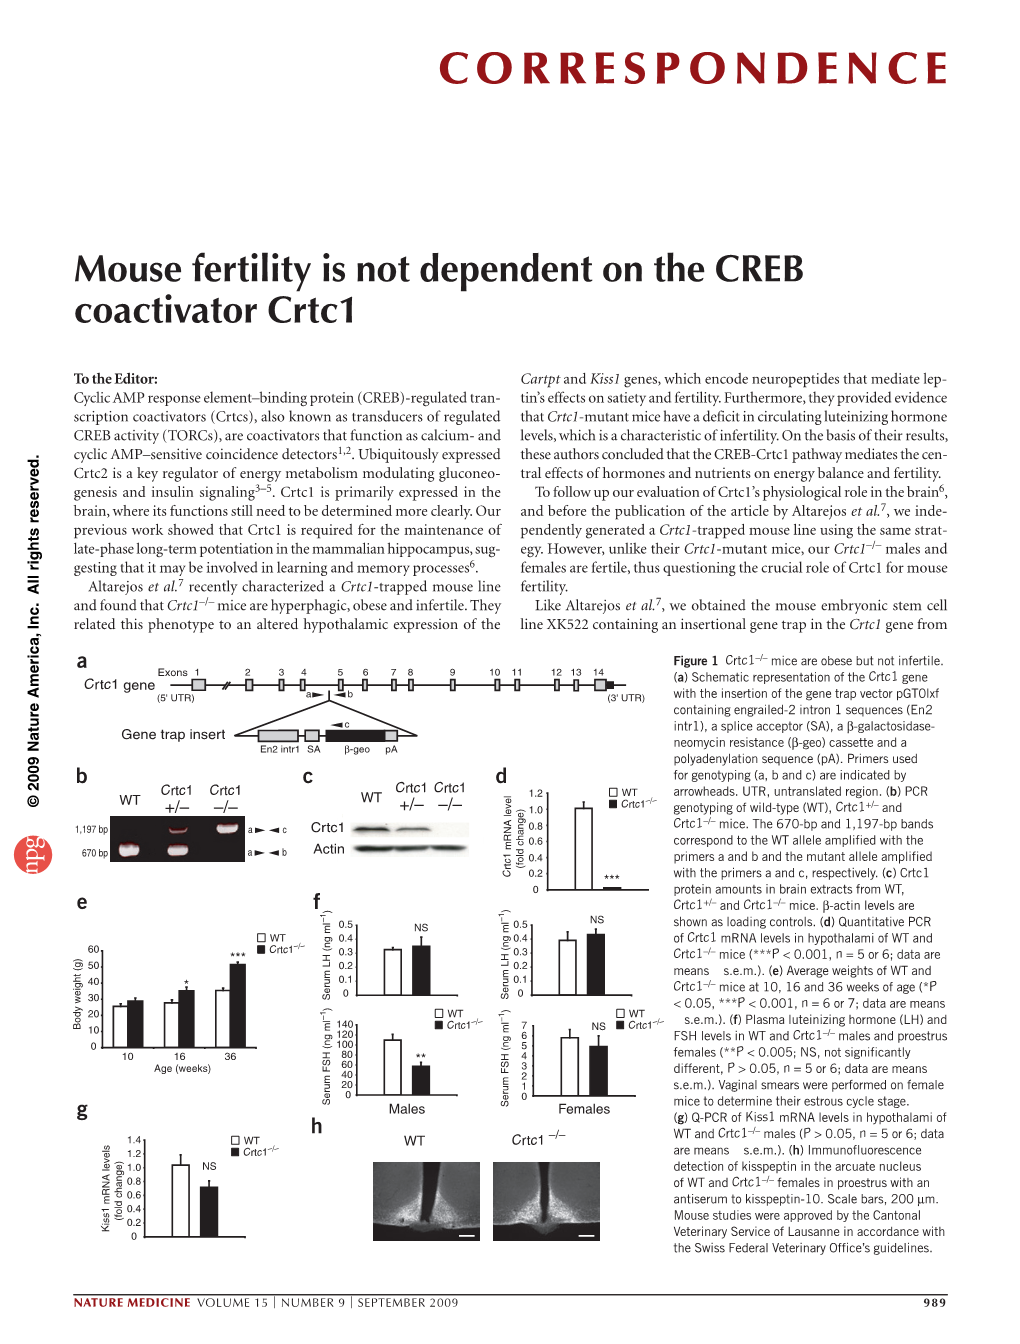 Mouse Fertility Is Not Dependent on the CREB Coactivator Crtc1